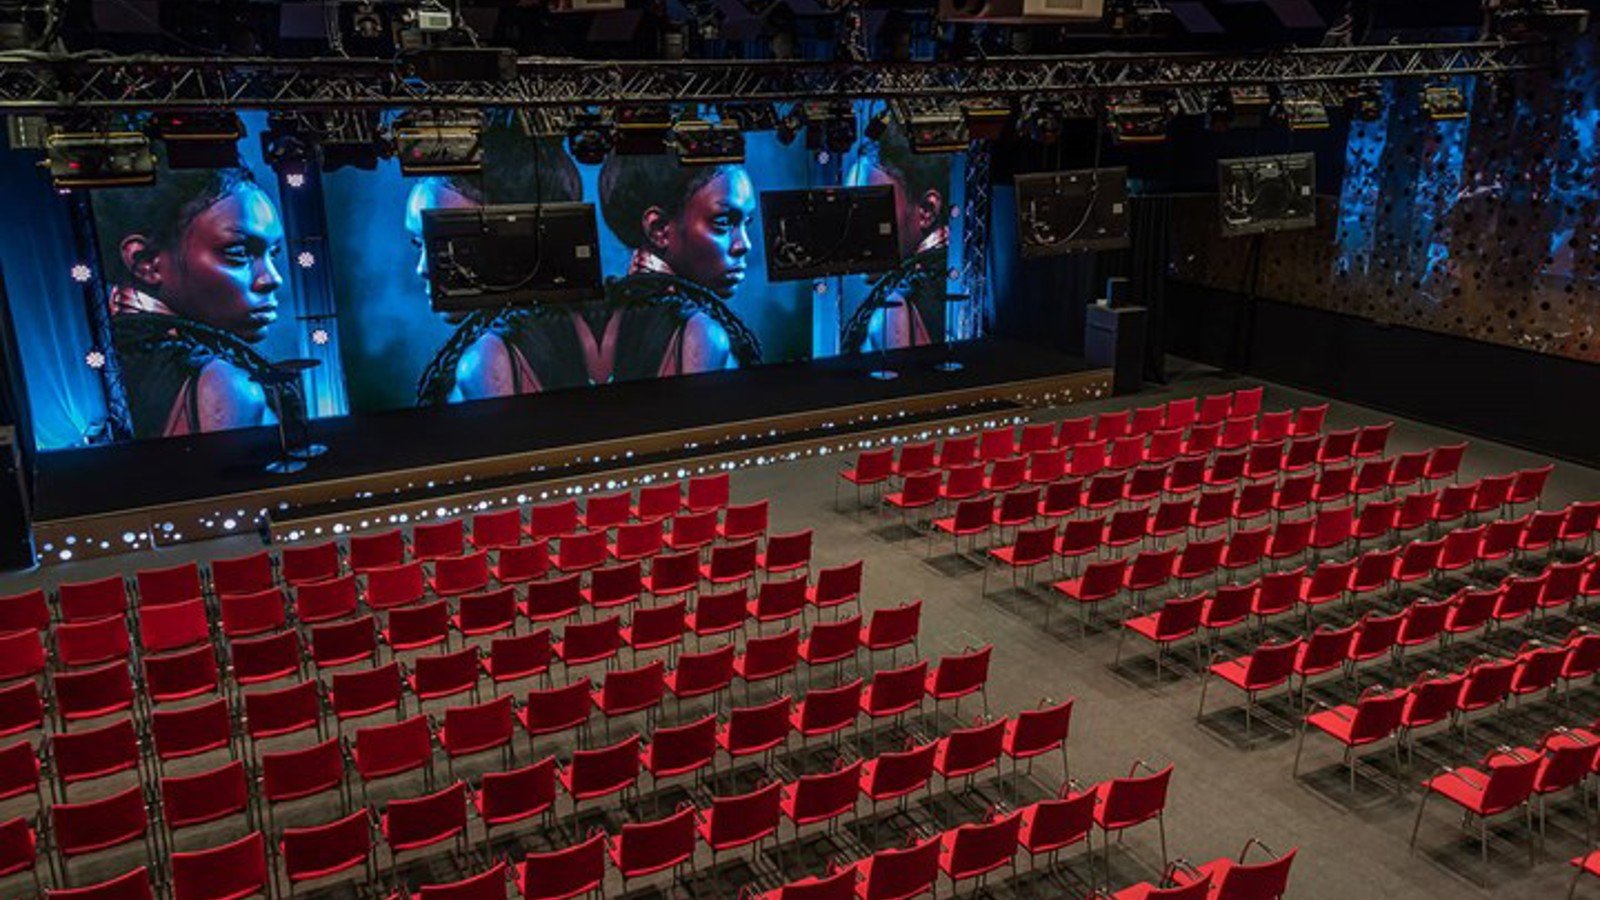 Large venue with cinema seating, red chairs and a projector